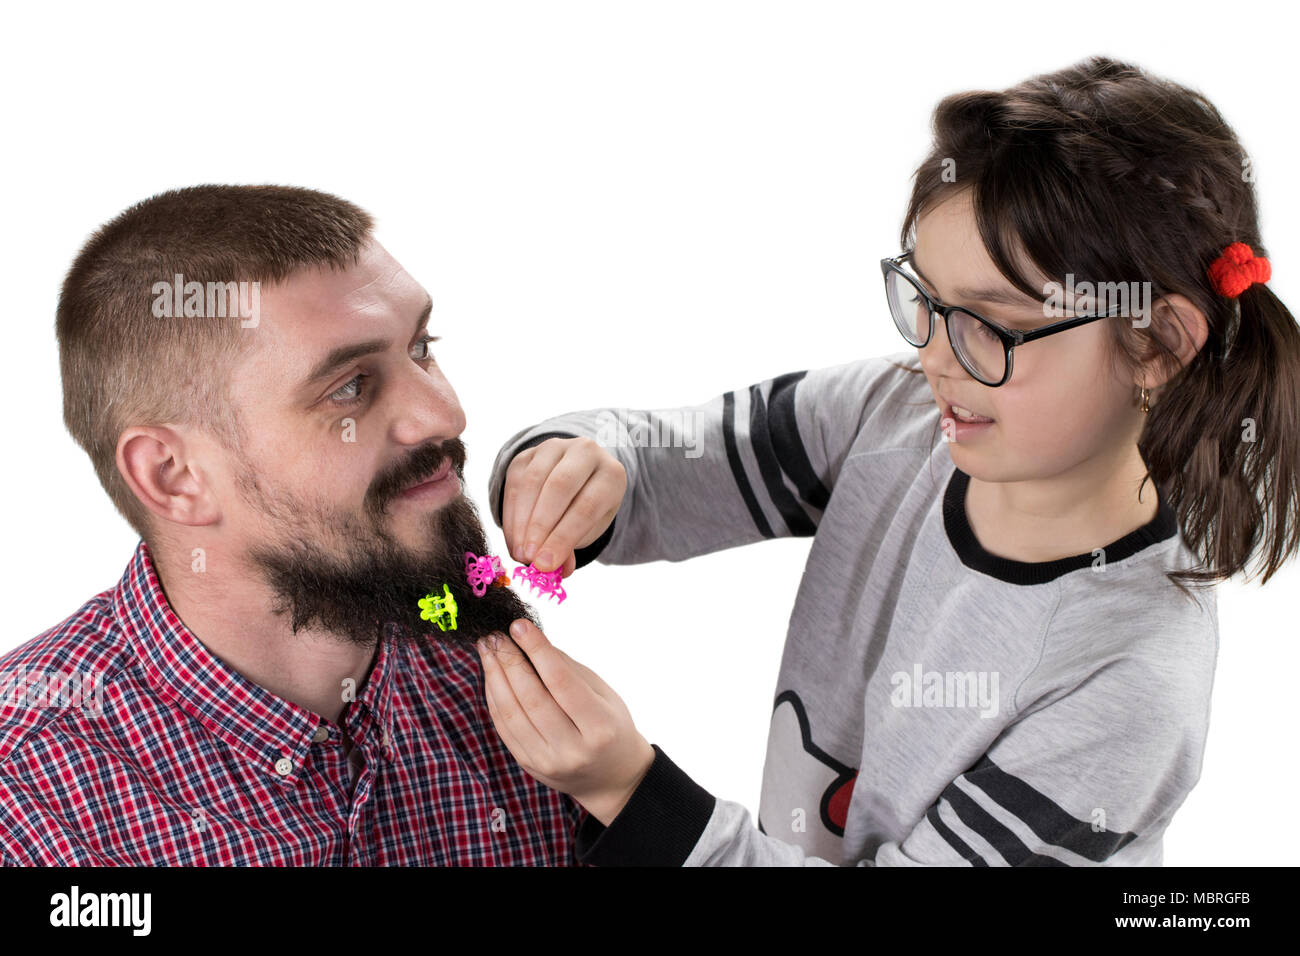 Father and daughter playing together. Girl is playing with her dad and making his hairstyle. Isolated on white. Stock Photo